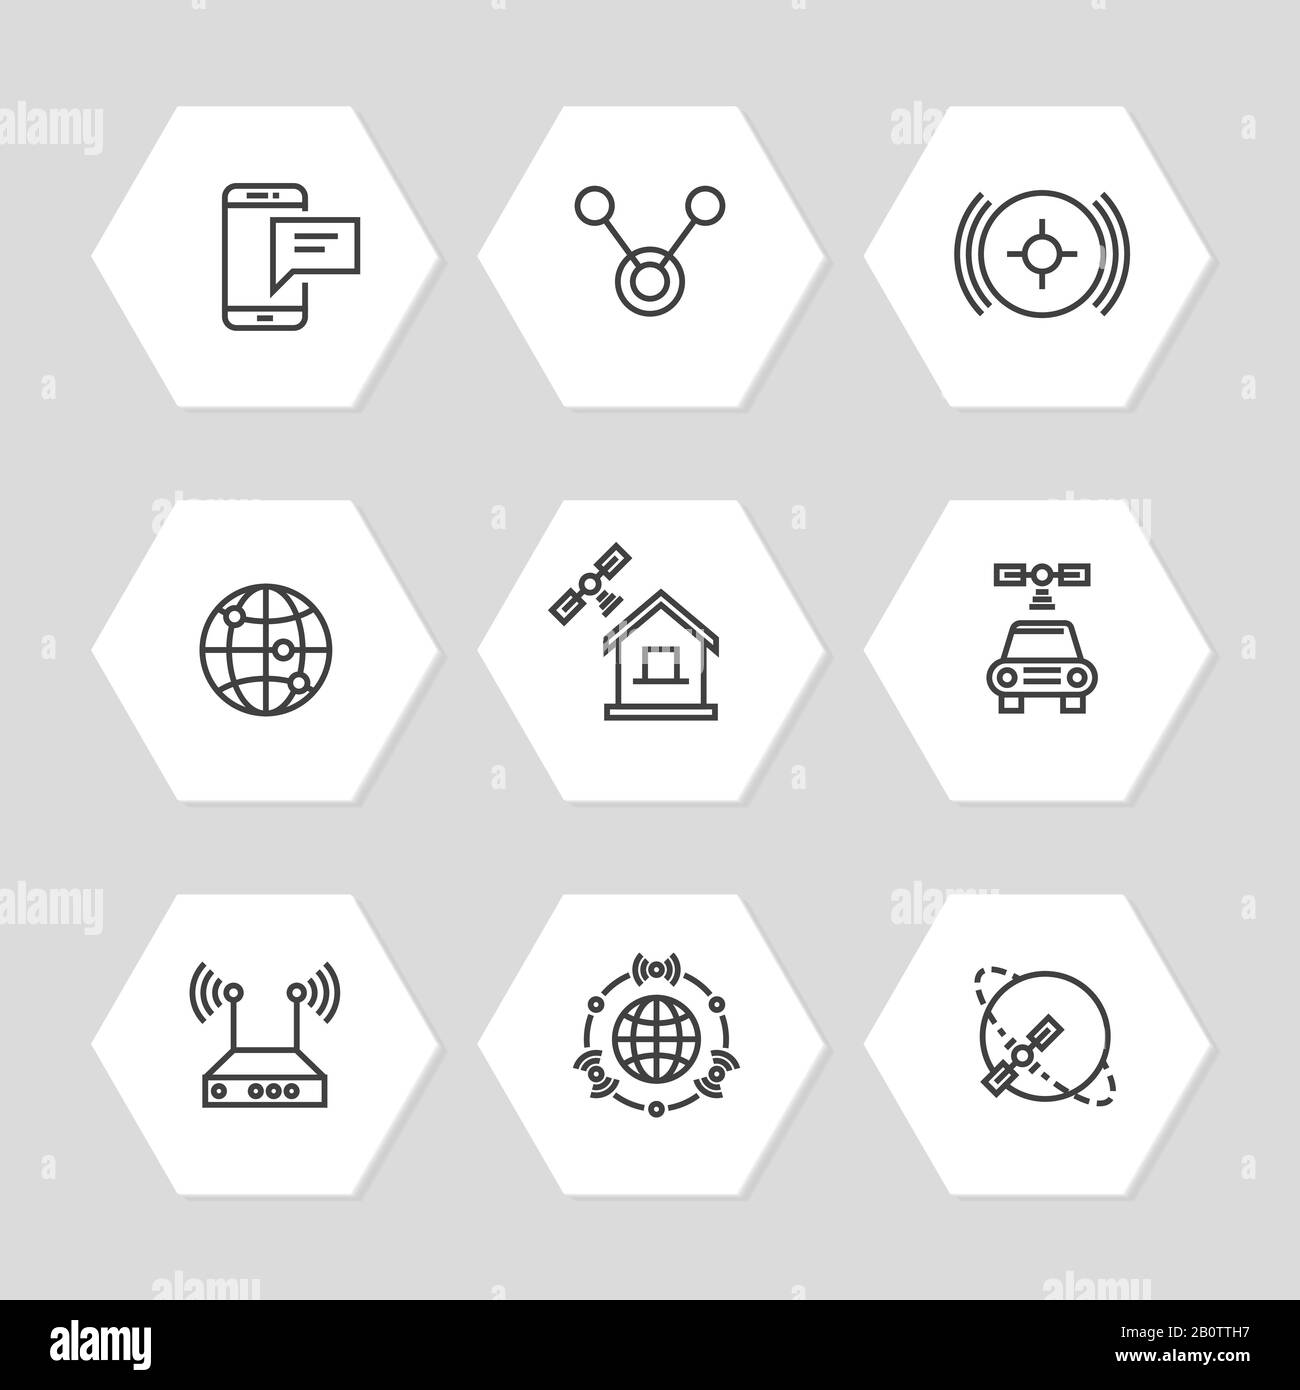 Media and communication ways icons line art style. Communication concept icons set illustration vector Stock Vector